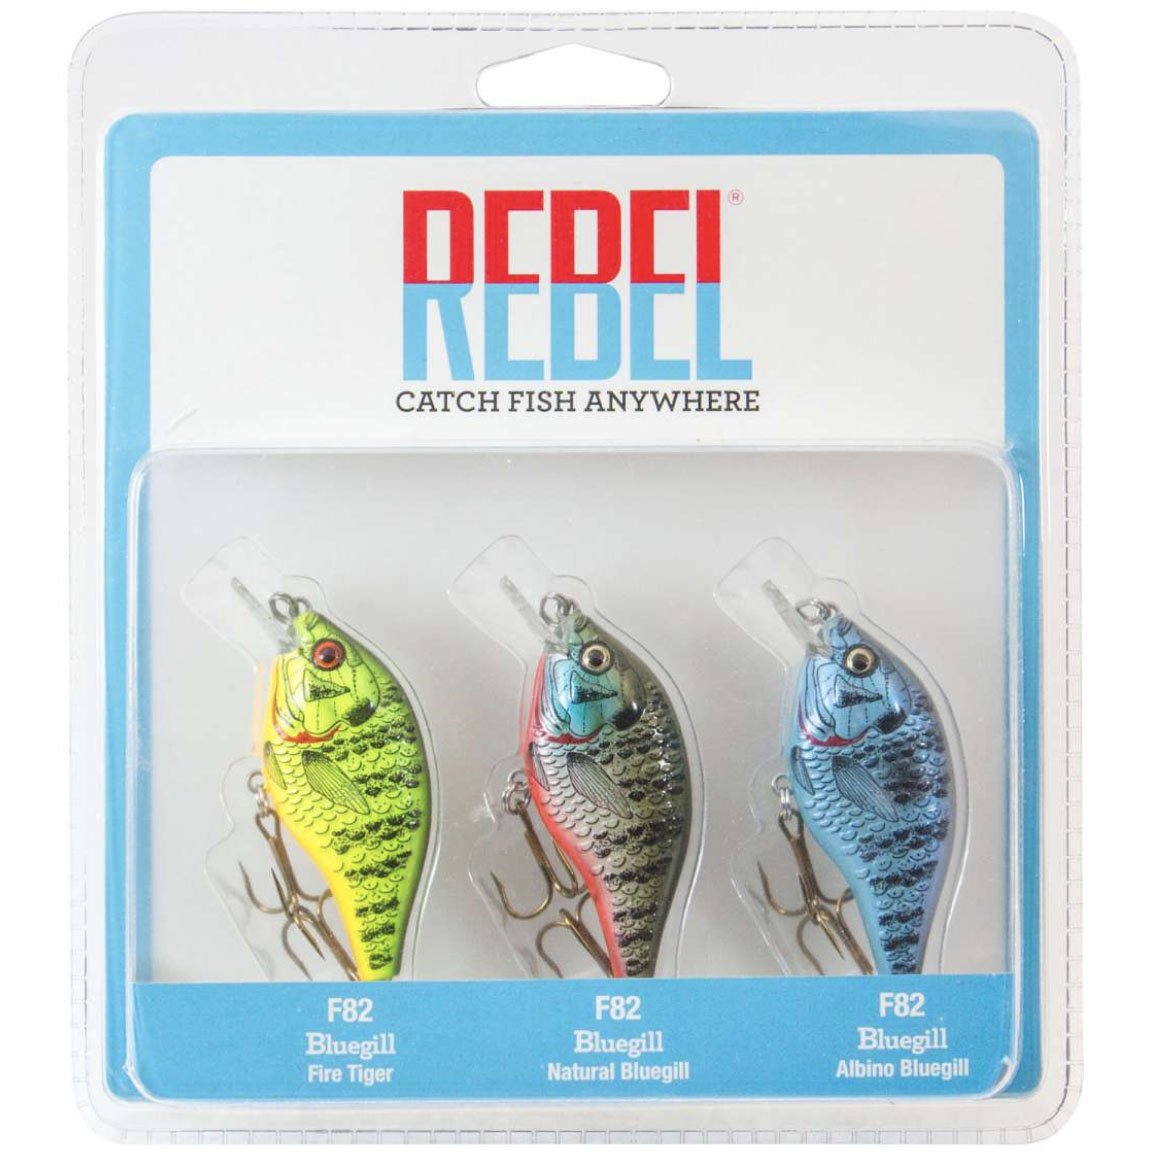 Rebel Lures F82536 Fire Tiger Bluegill Tackle, Plugs -  Canada